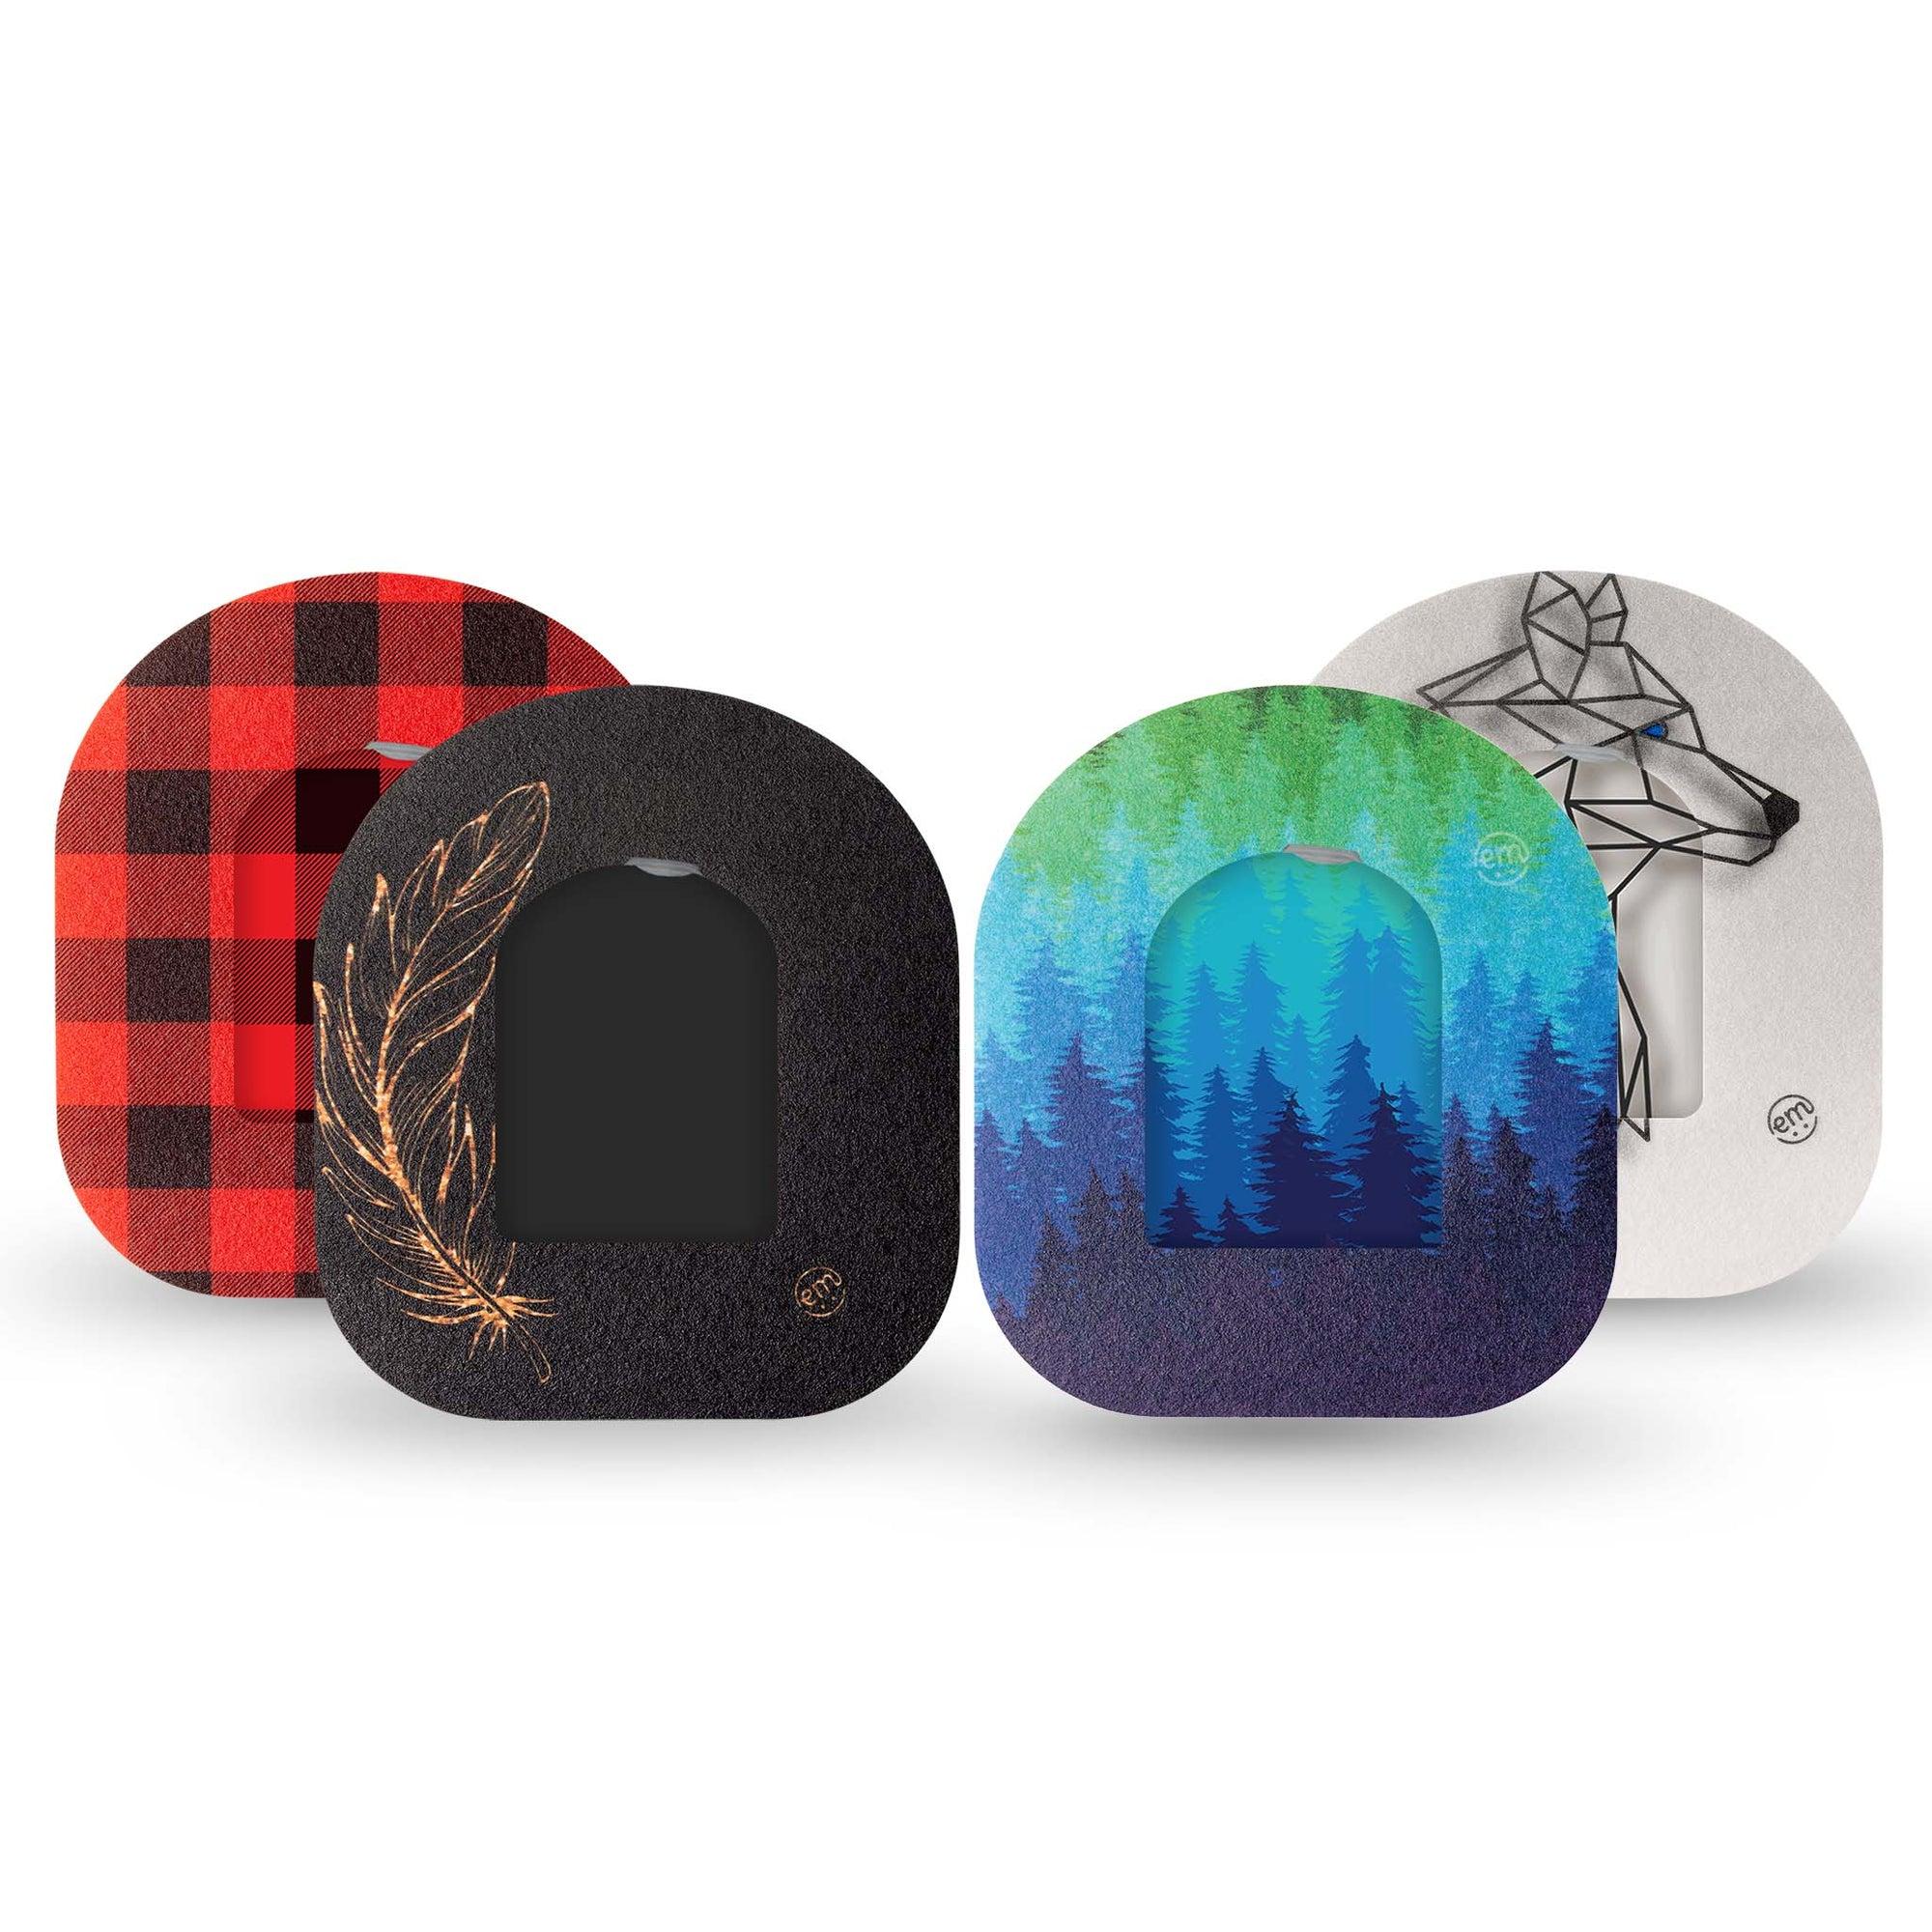 ExpressionMed Into the Woods Variety Pack Pod Tape and Sticker, 8-Pack, Forest Adventure Inspired, CGM Sticker and Tape Pairing